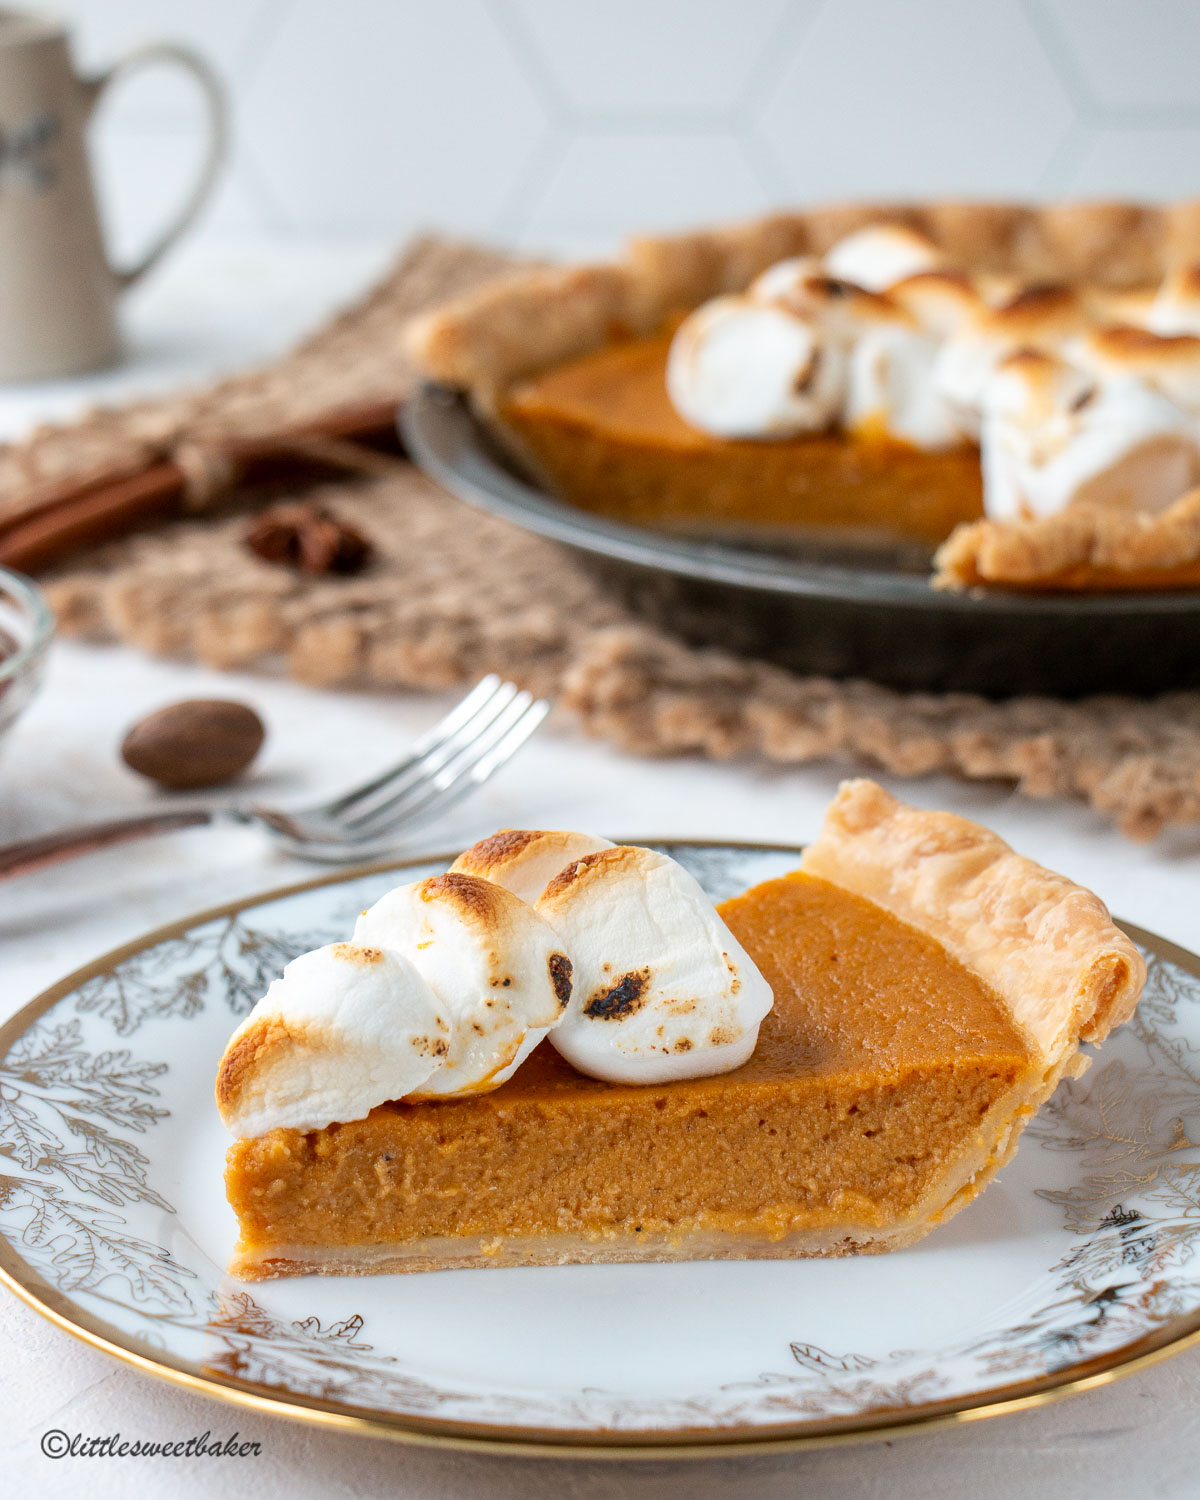 A slice of sweet potato pie on a white and gold plate.